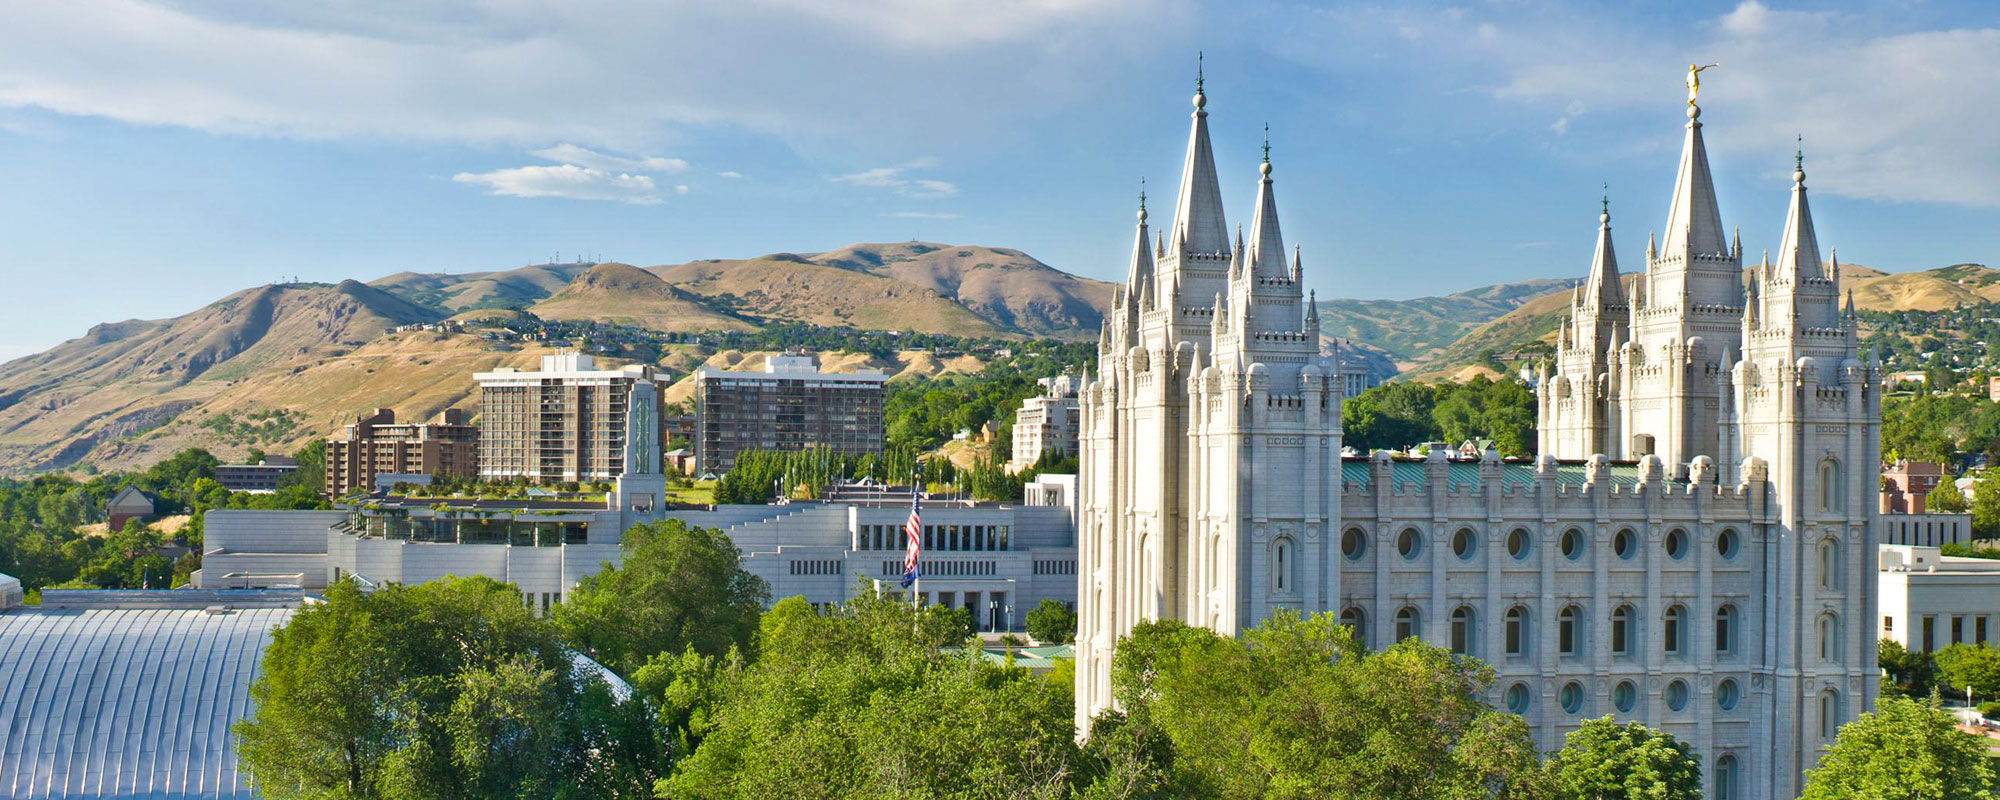 Featured image for “Kanab Geotechnical and Structural Design Firm Assists With Salt Lake Temple Renovations”